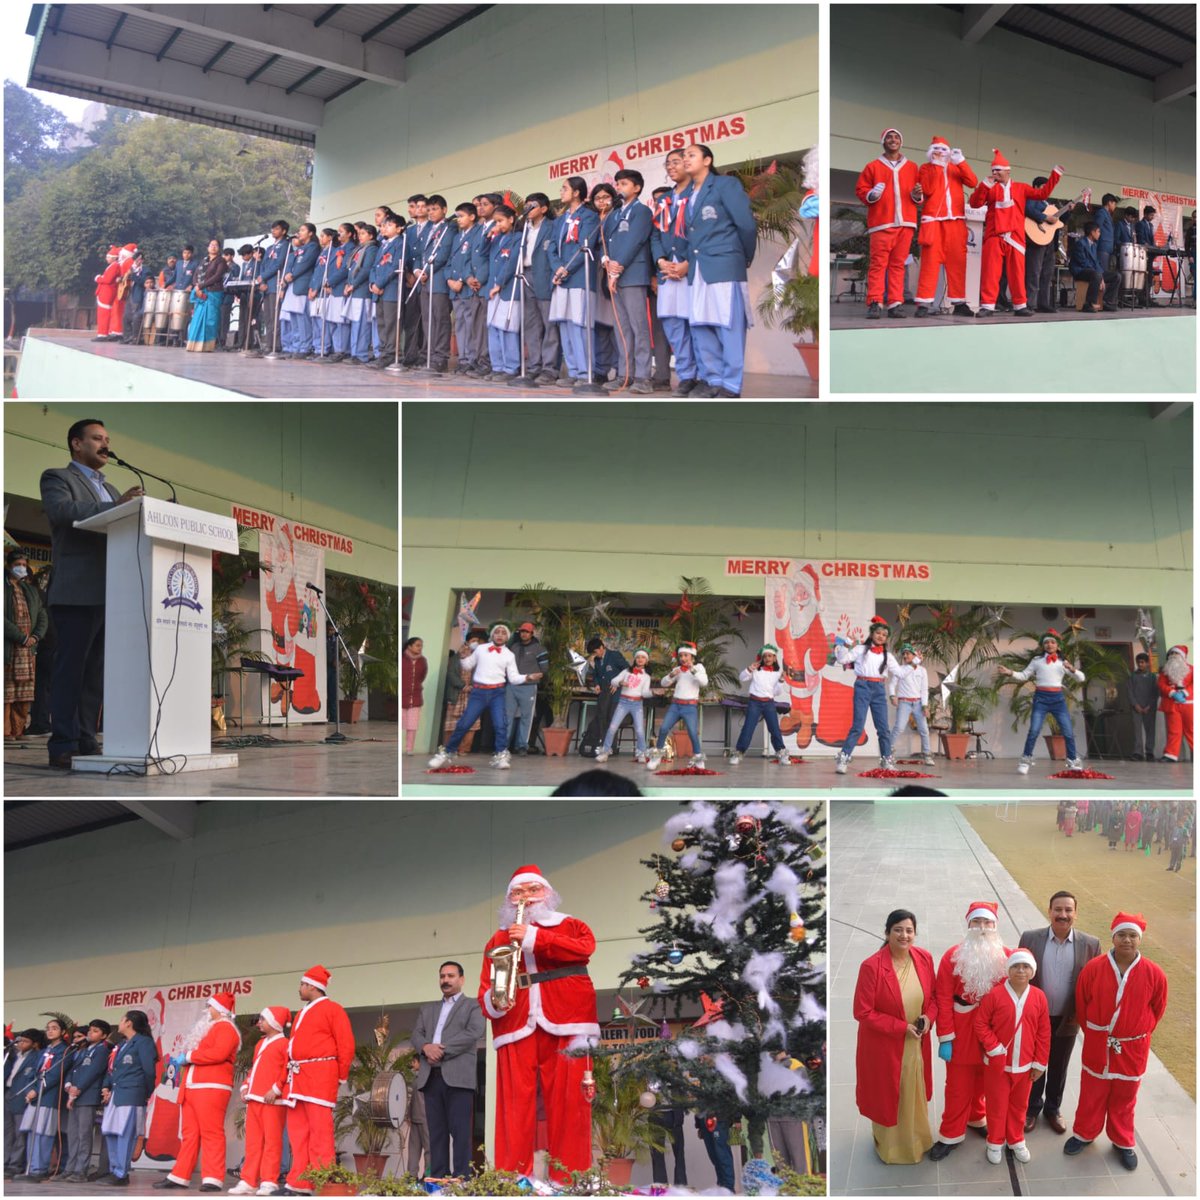 Christmas Extravaganza at #AhlconPublicSchool! Reflecting on the season of joy, students showcased scintillating dance performances, and the atrium echoed with the melodious Christmas carols sung by the students. A celebration filled with happiness and merriment! Merry Christmas